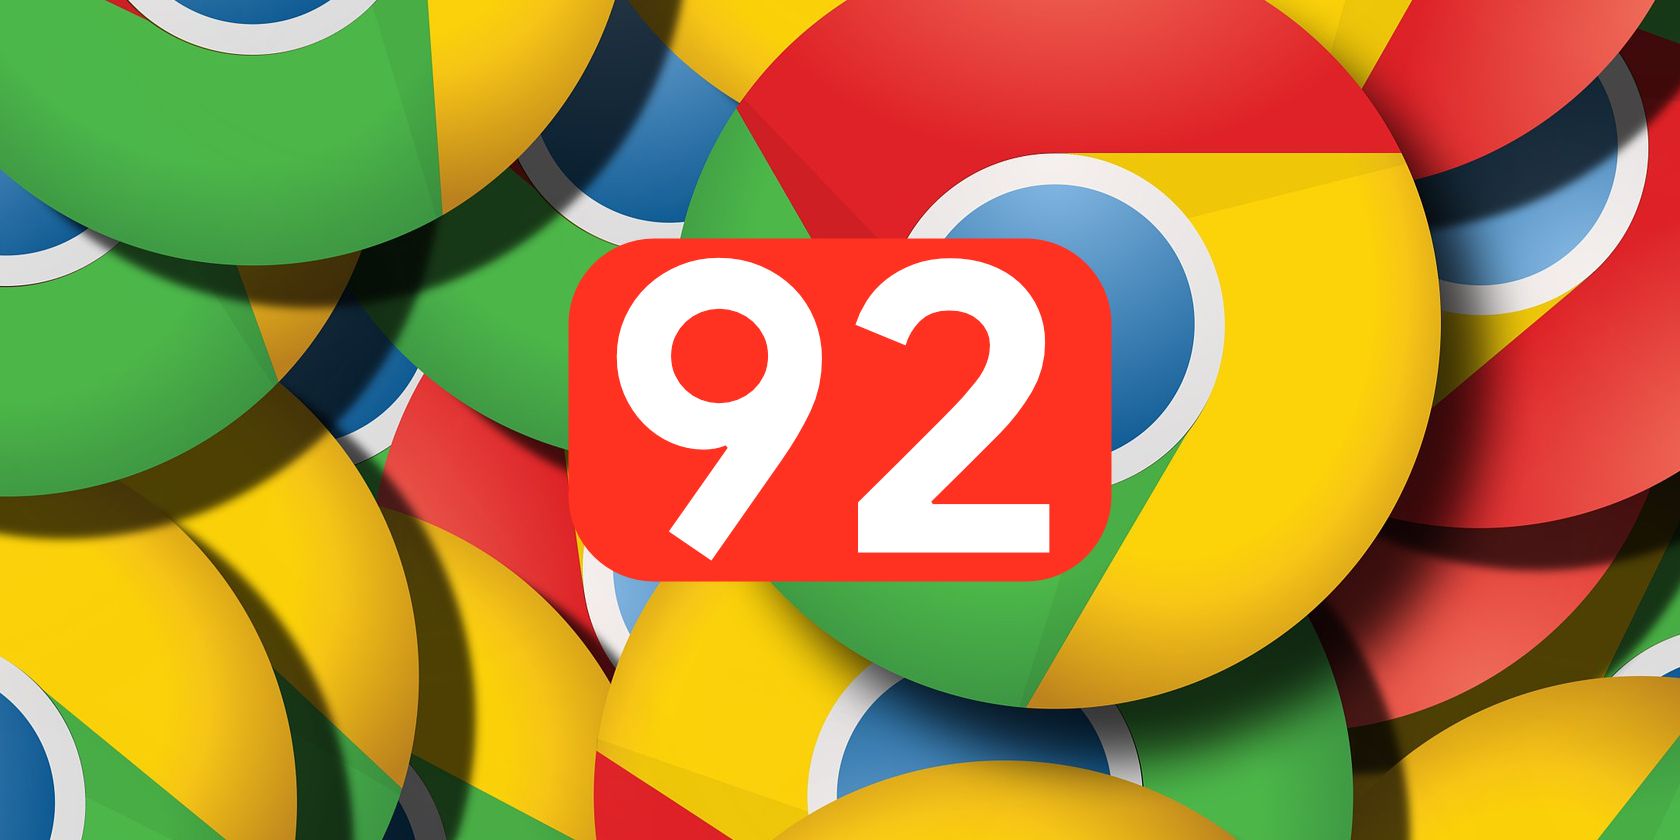 The number 92 in front of multiple Google Chrome logos.